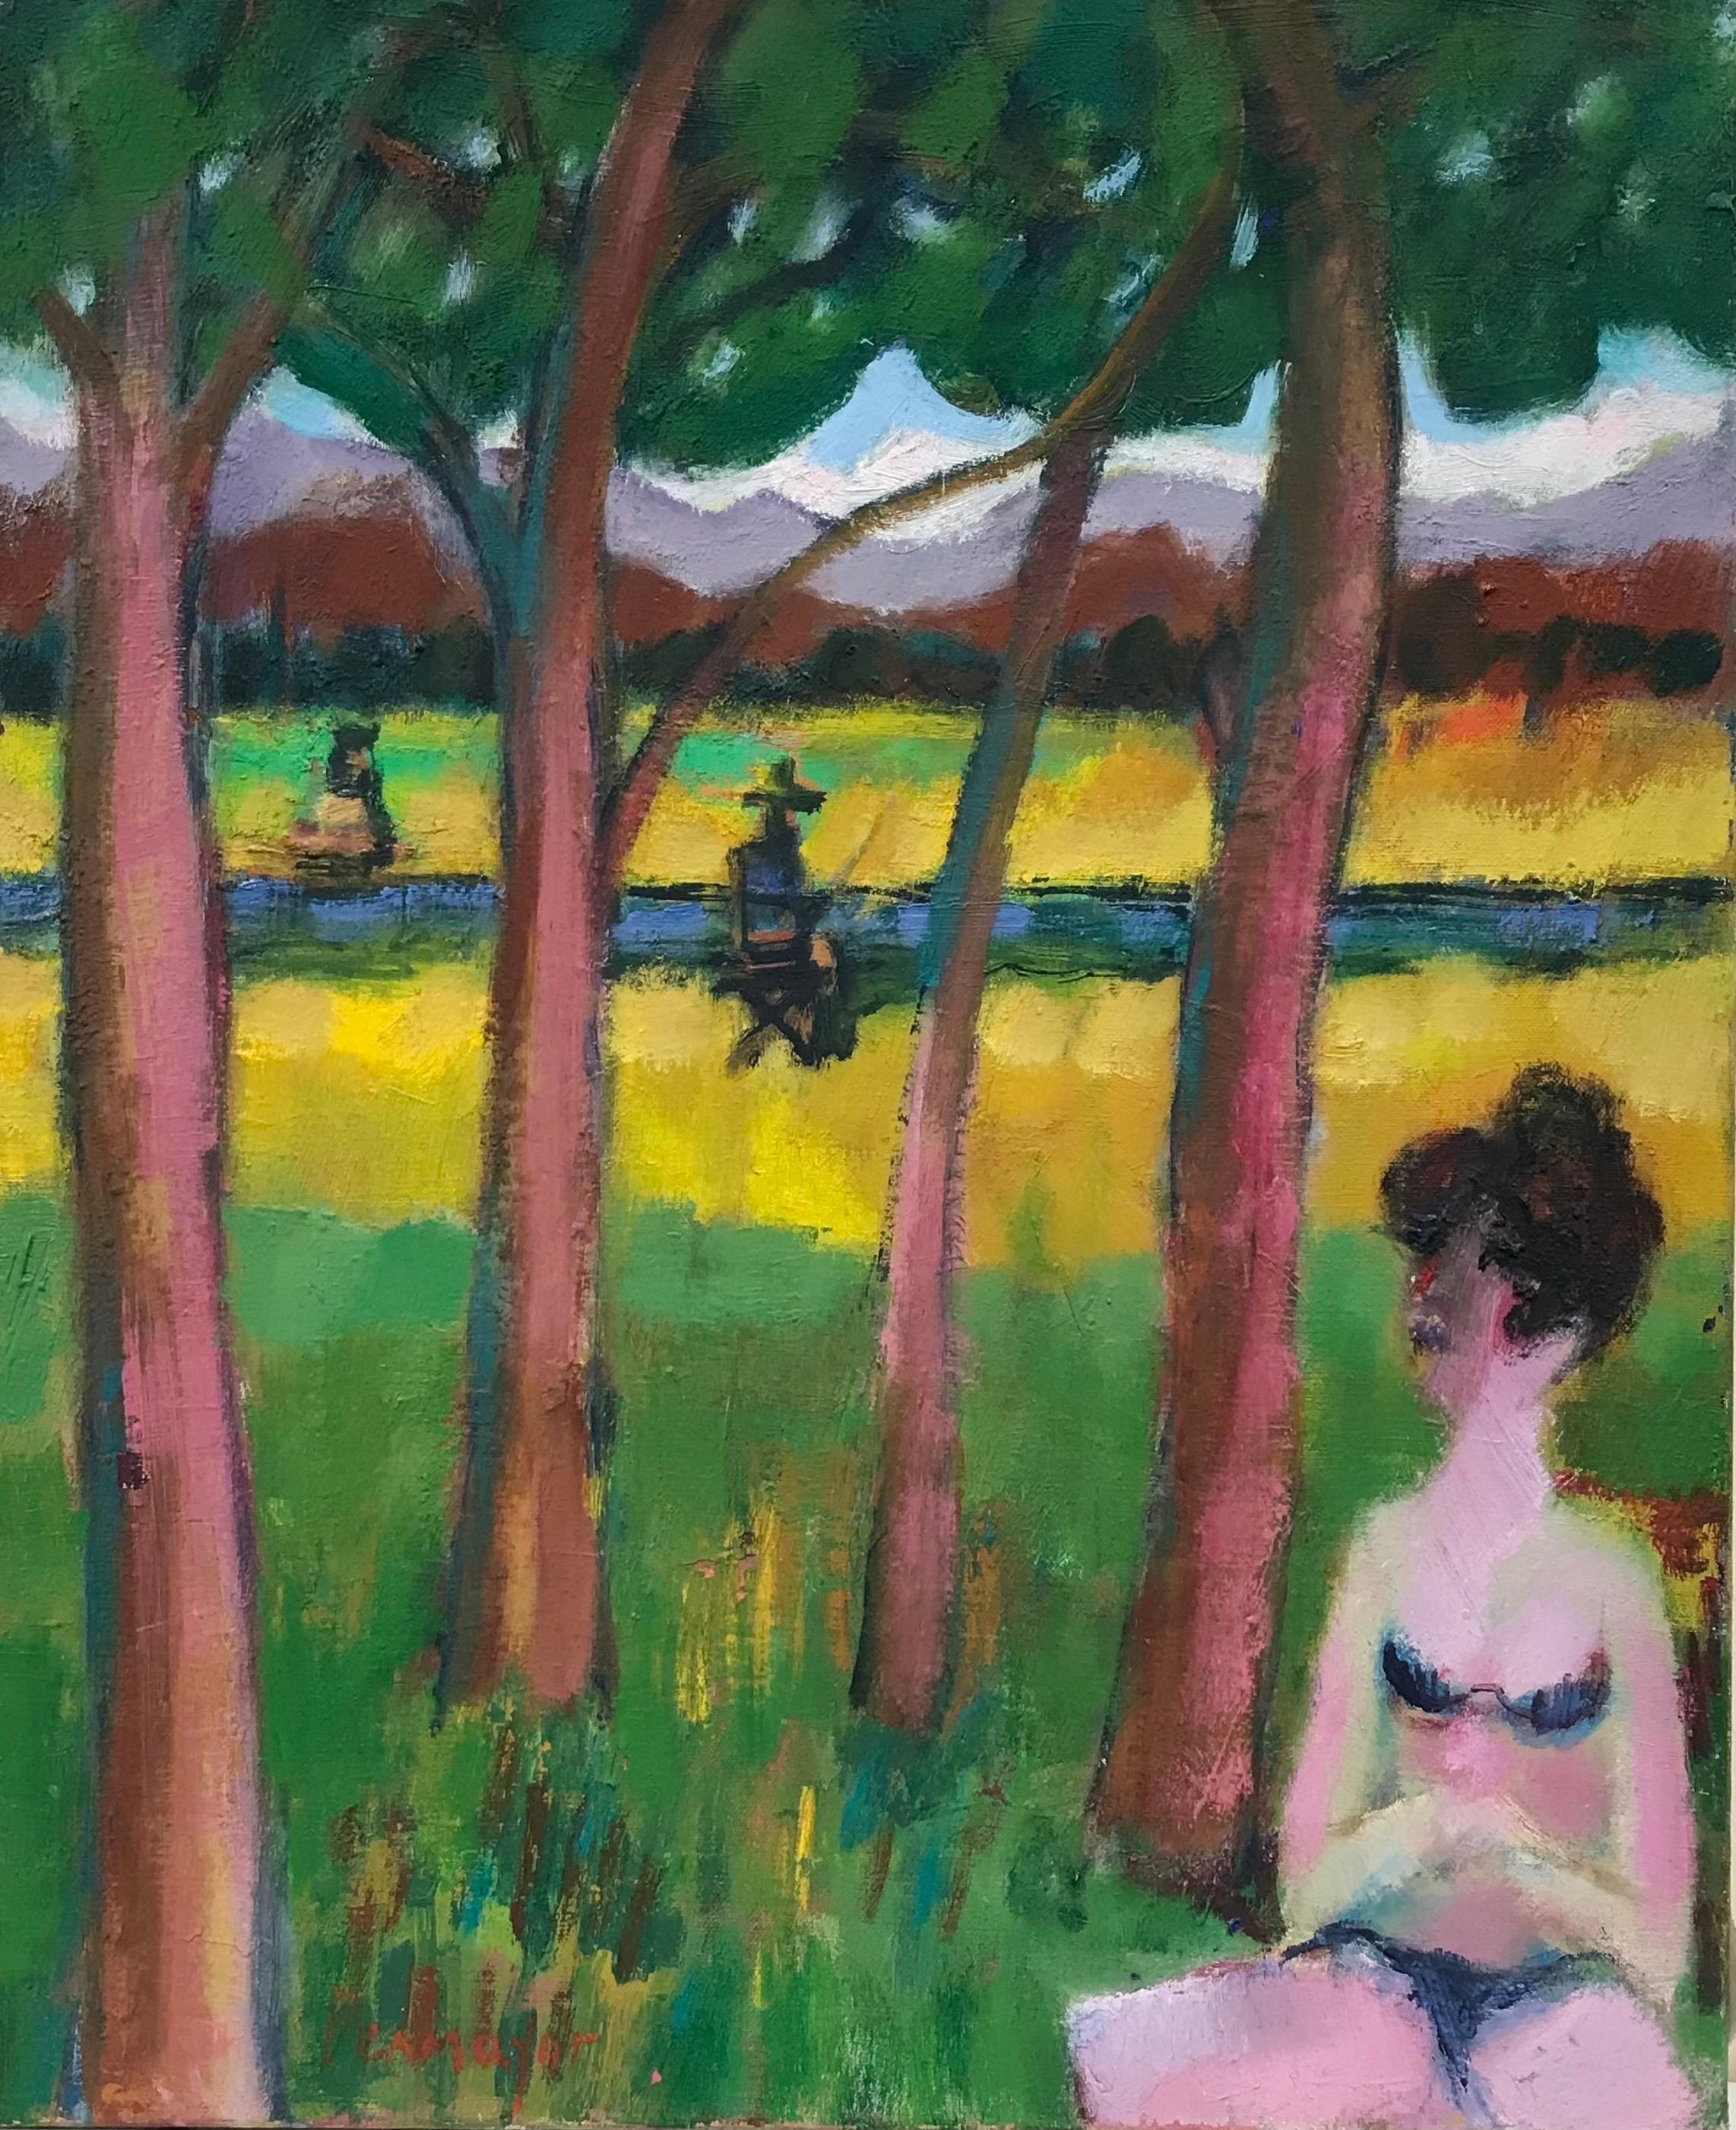 20th Century French School Figurative Painting - Large French Modernist Signed Oil, Lady in Bikini in Meadows by River